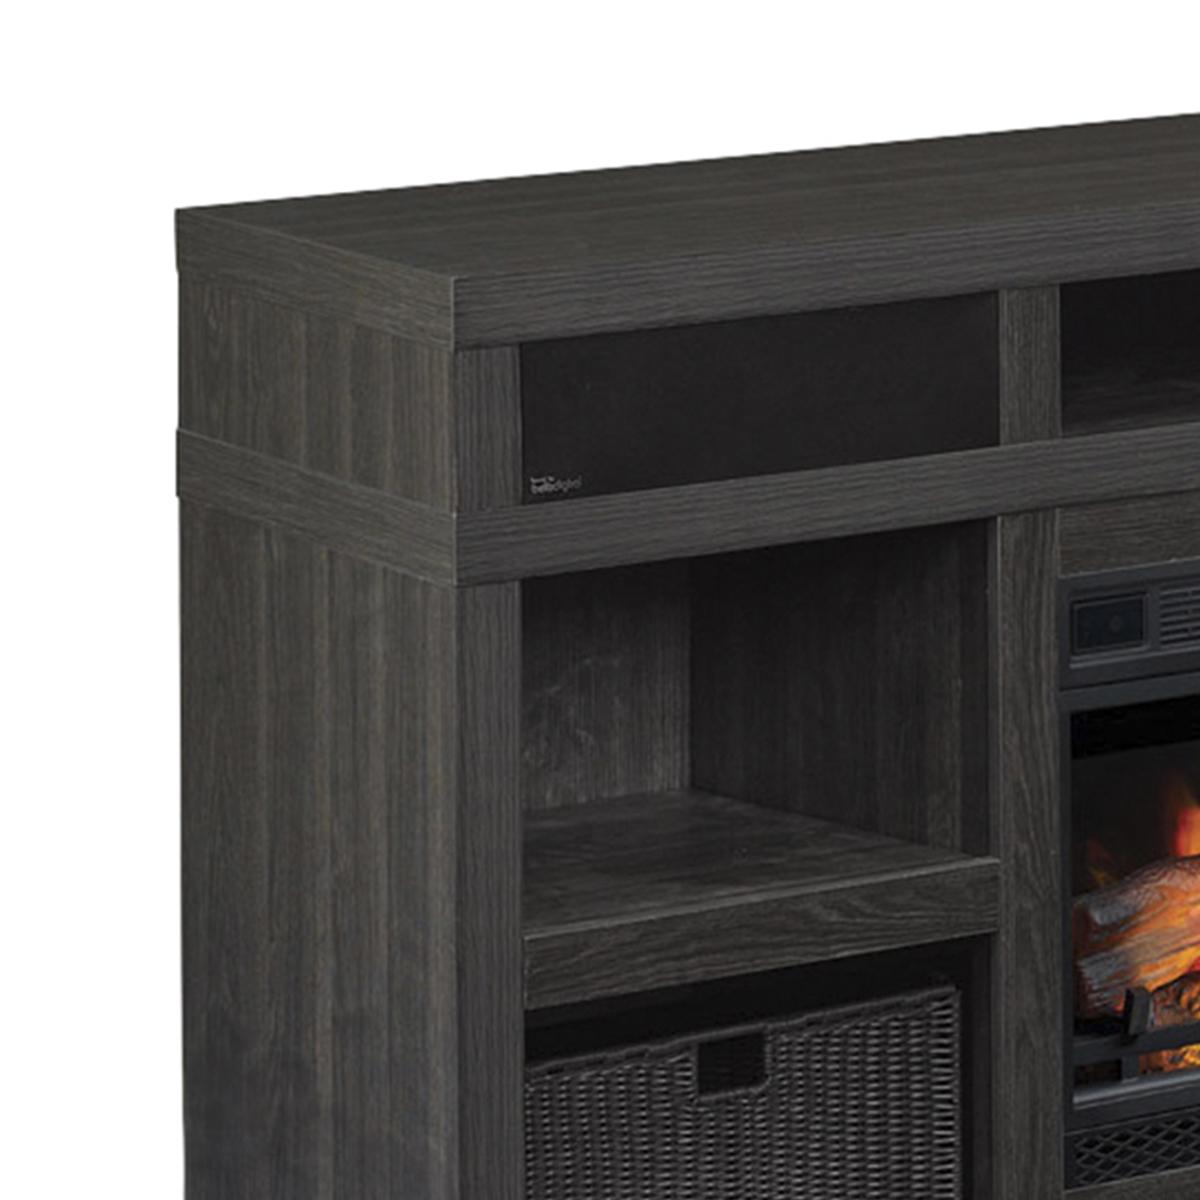 White Portable Fireplace Inspirational Fabio Flames Greatlin 64" Tv Stand In Black Walnut